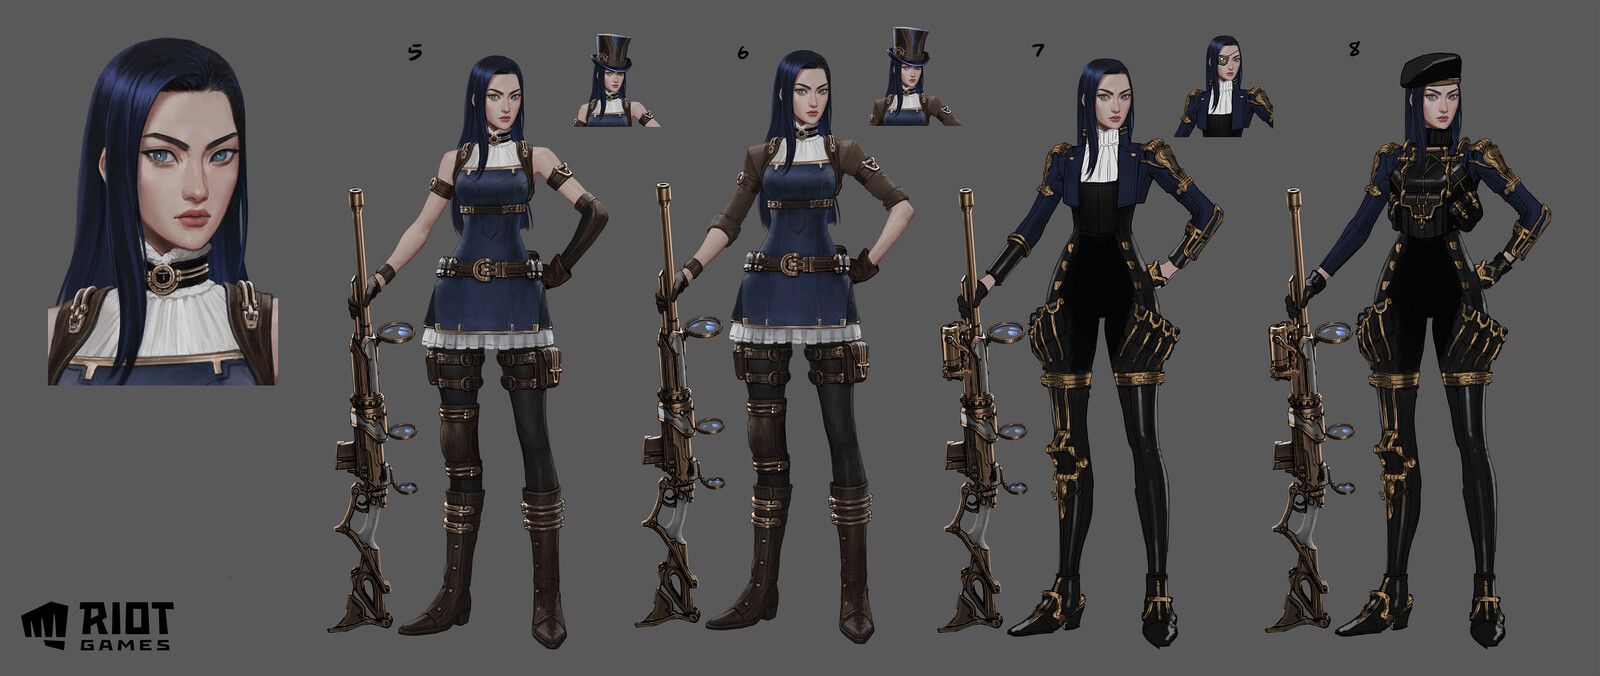 More Caitlyn designs.  Played with a more tactical look as well.